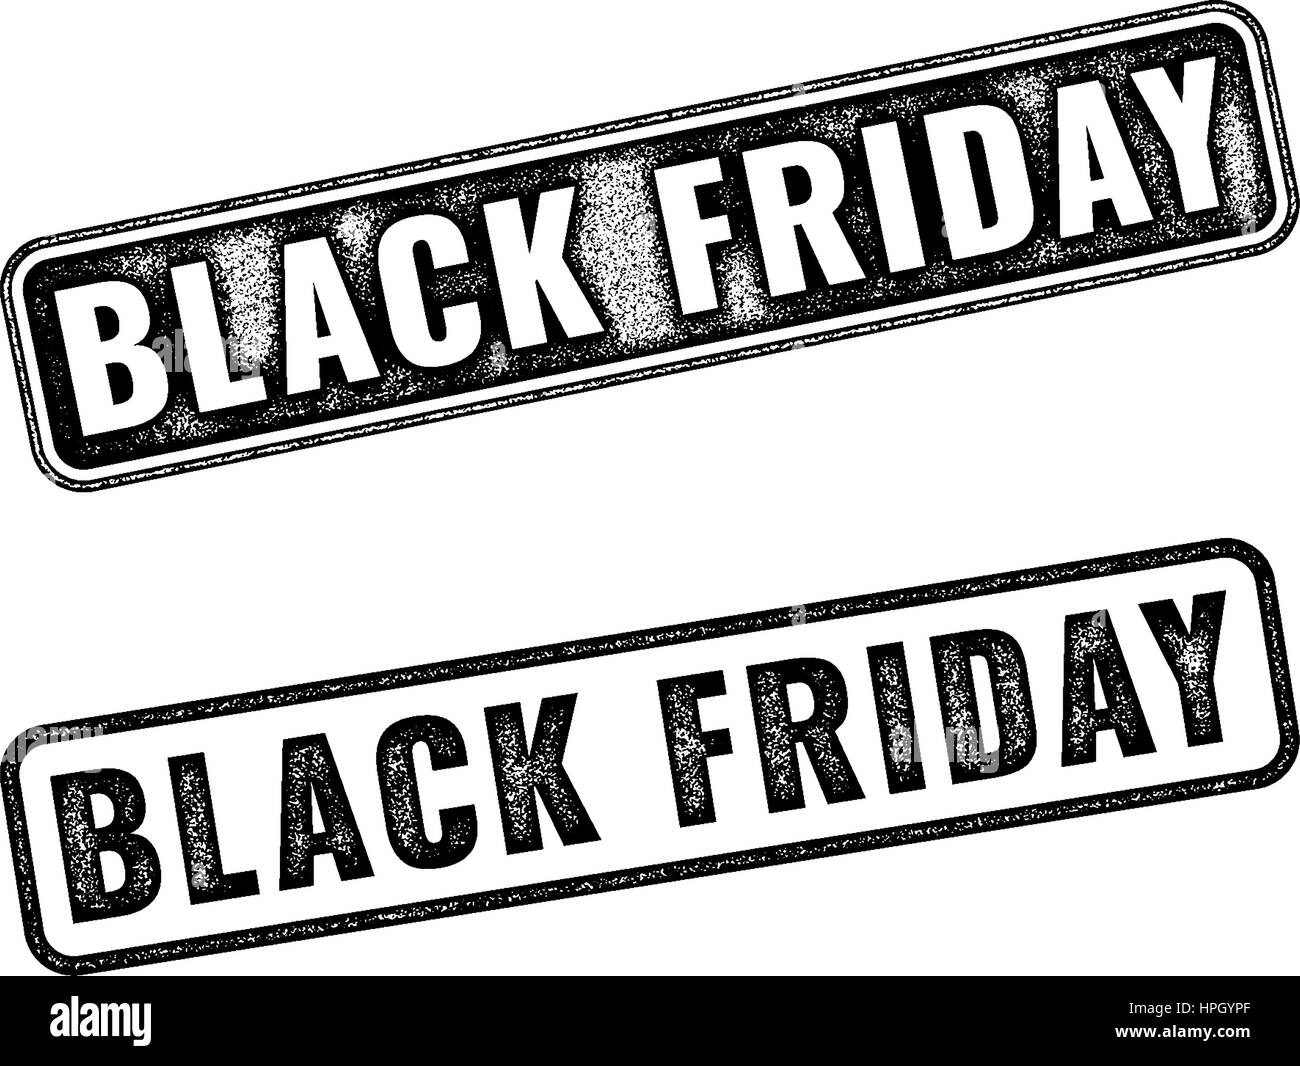 Two realistic vector Black Friday stamps isolated on white background. Set of black imprints announcement of annual fair Stock Vector